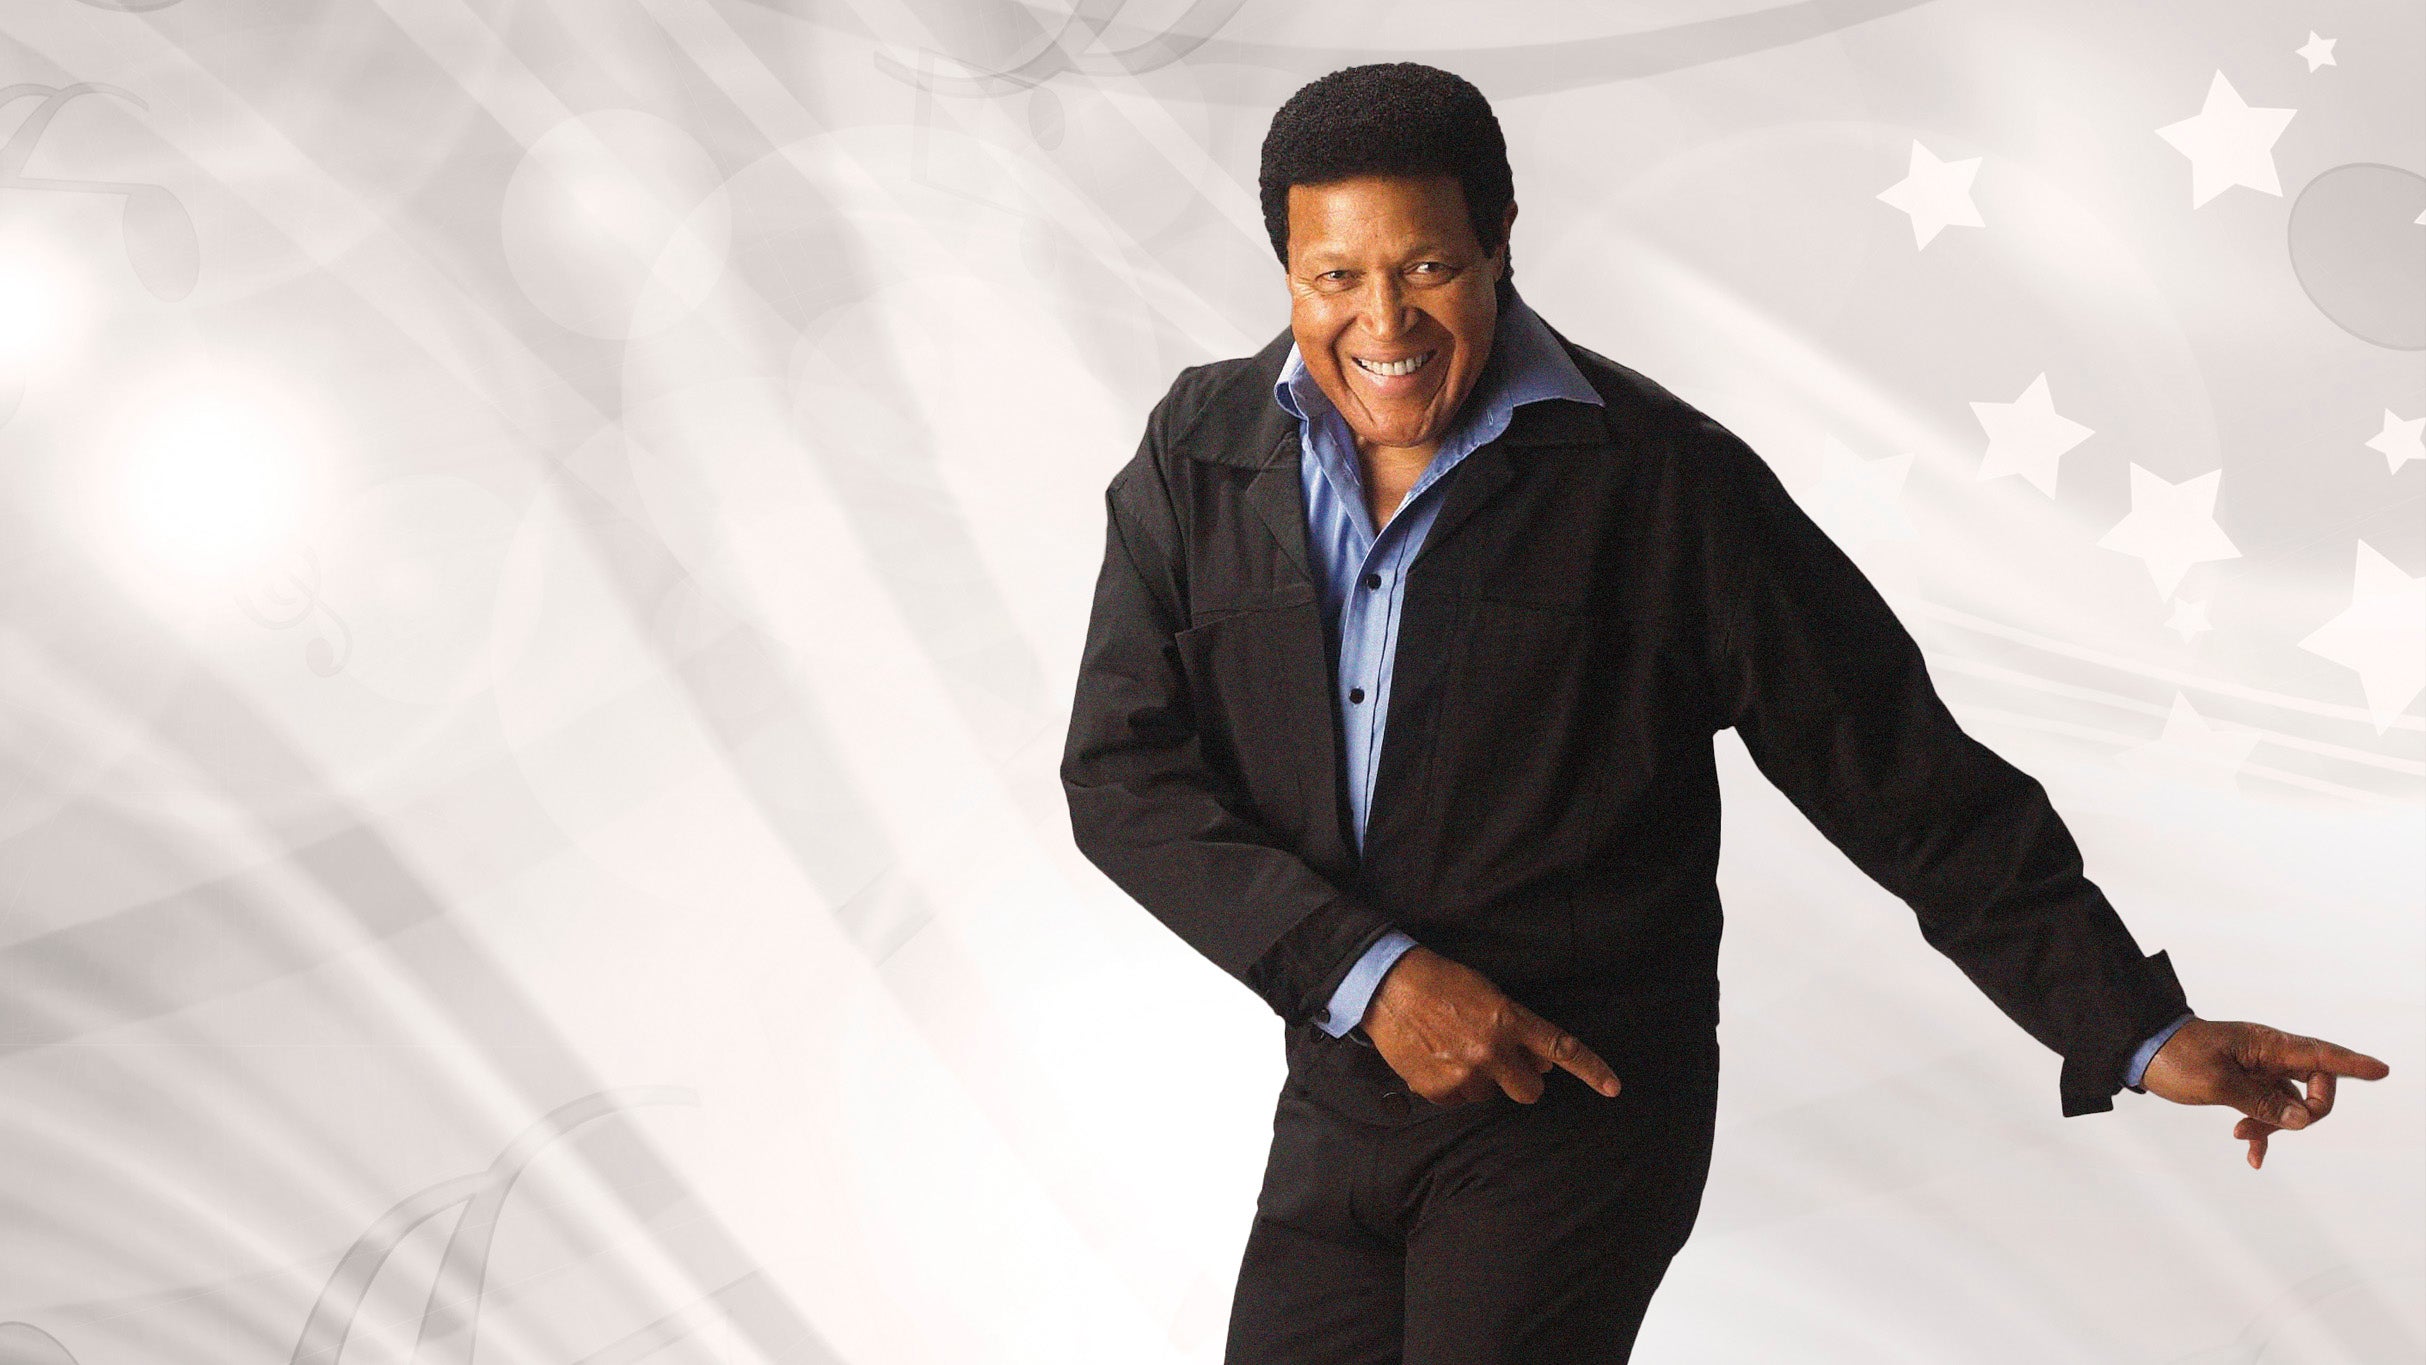 Chubby Checker in Niagara Falls promo photo for Official Platinum Onsale presale offer code